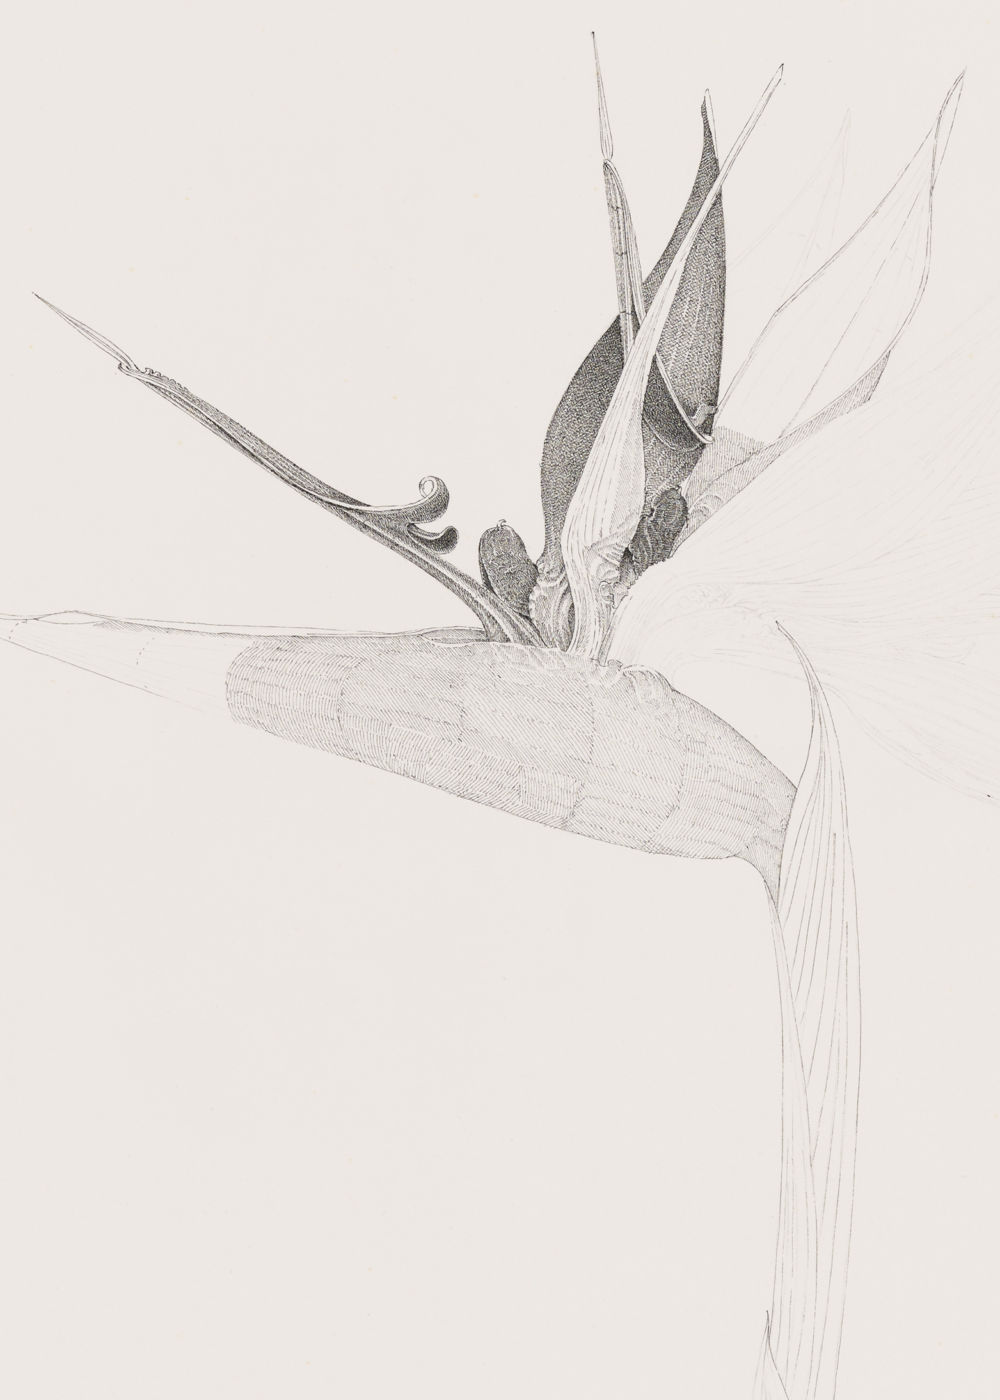 ​​Charmian Johnson, not titled (detail), unknown date, ink and graphite on paper, 31 x 23 in. (79 x 58 cm)​ by 